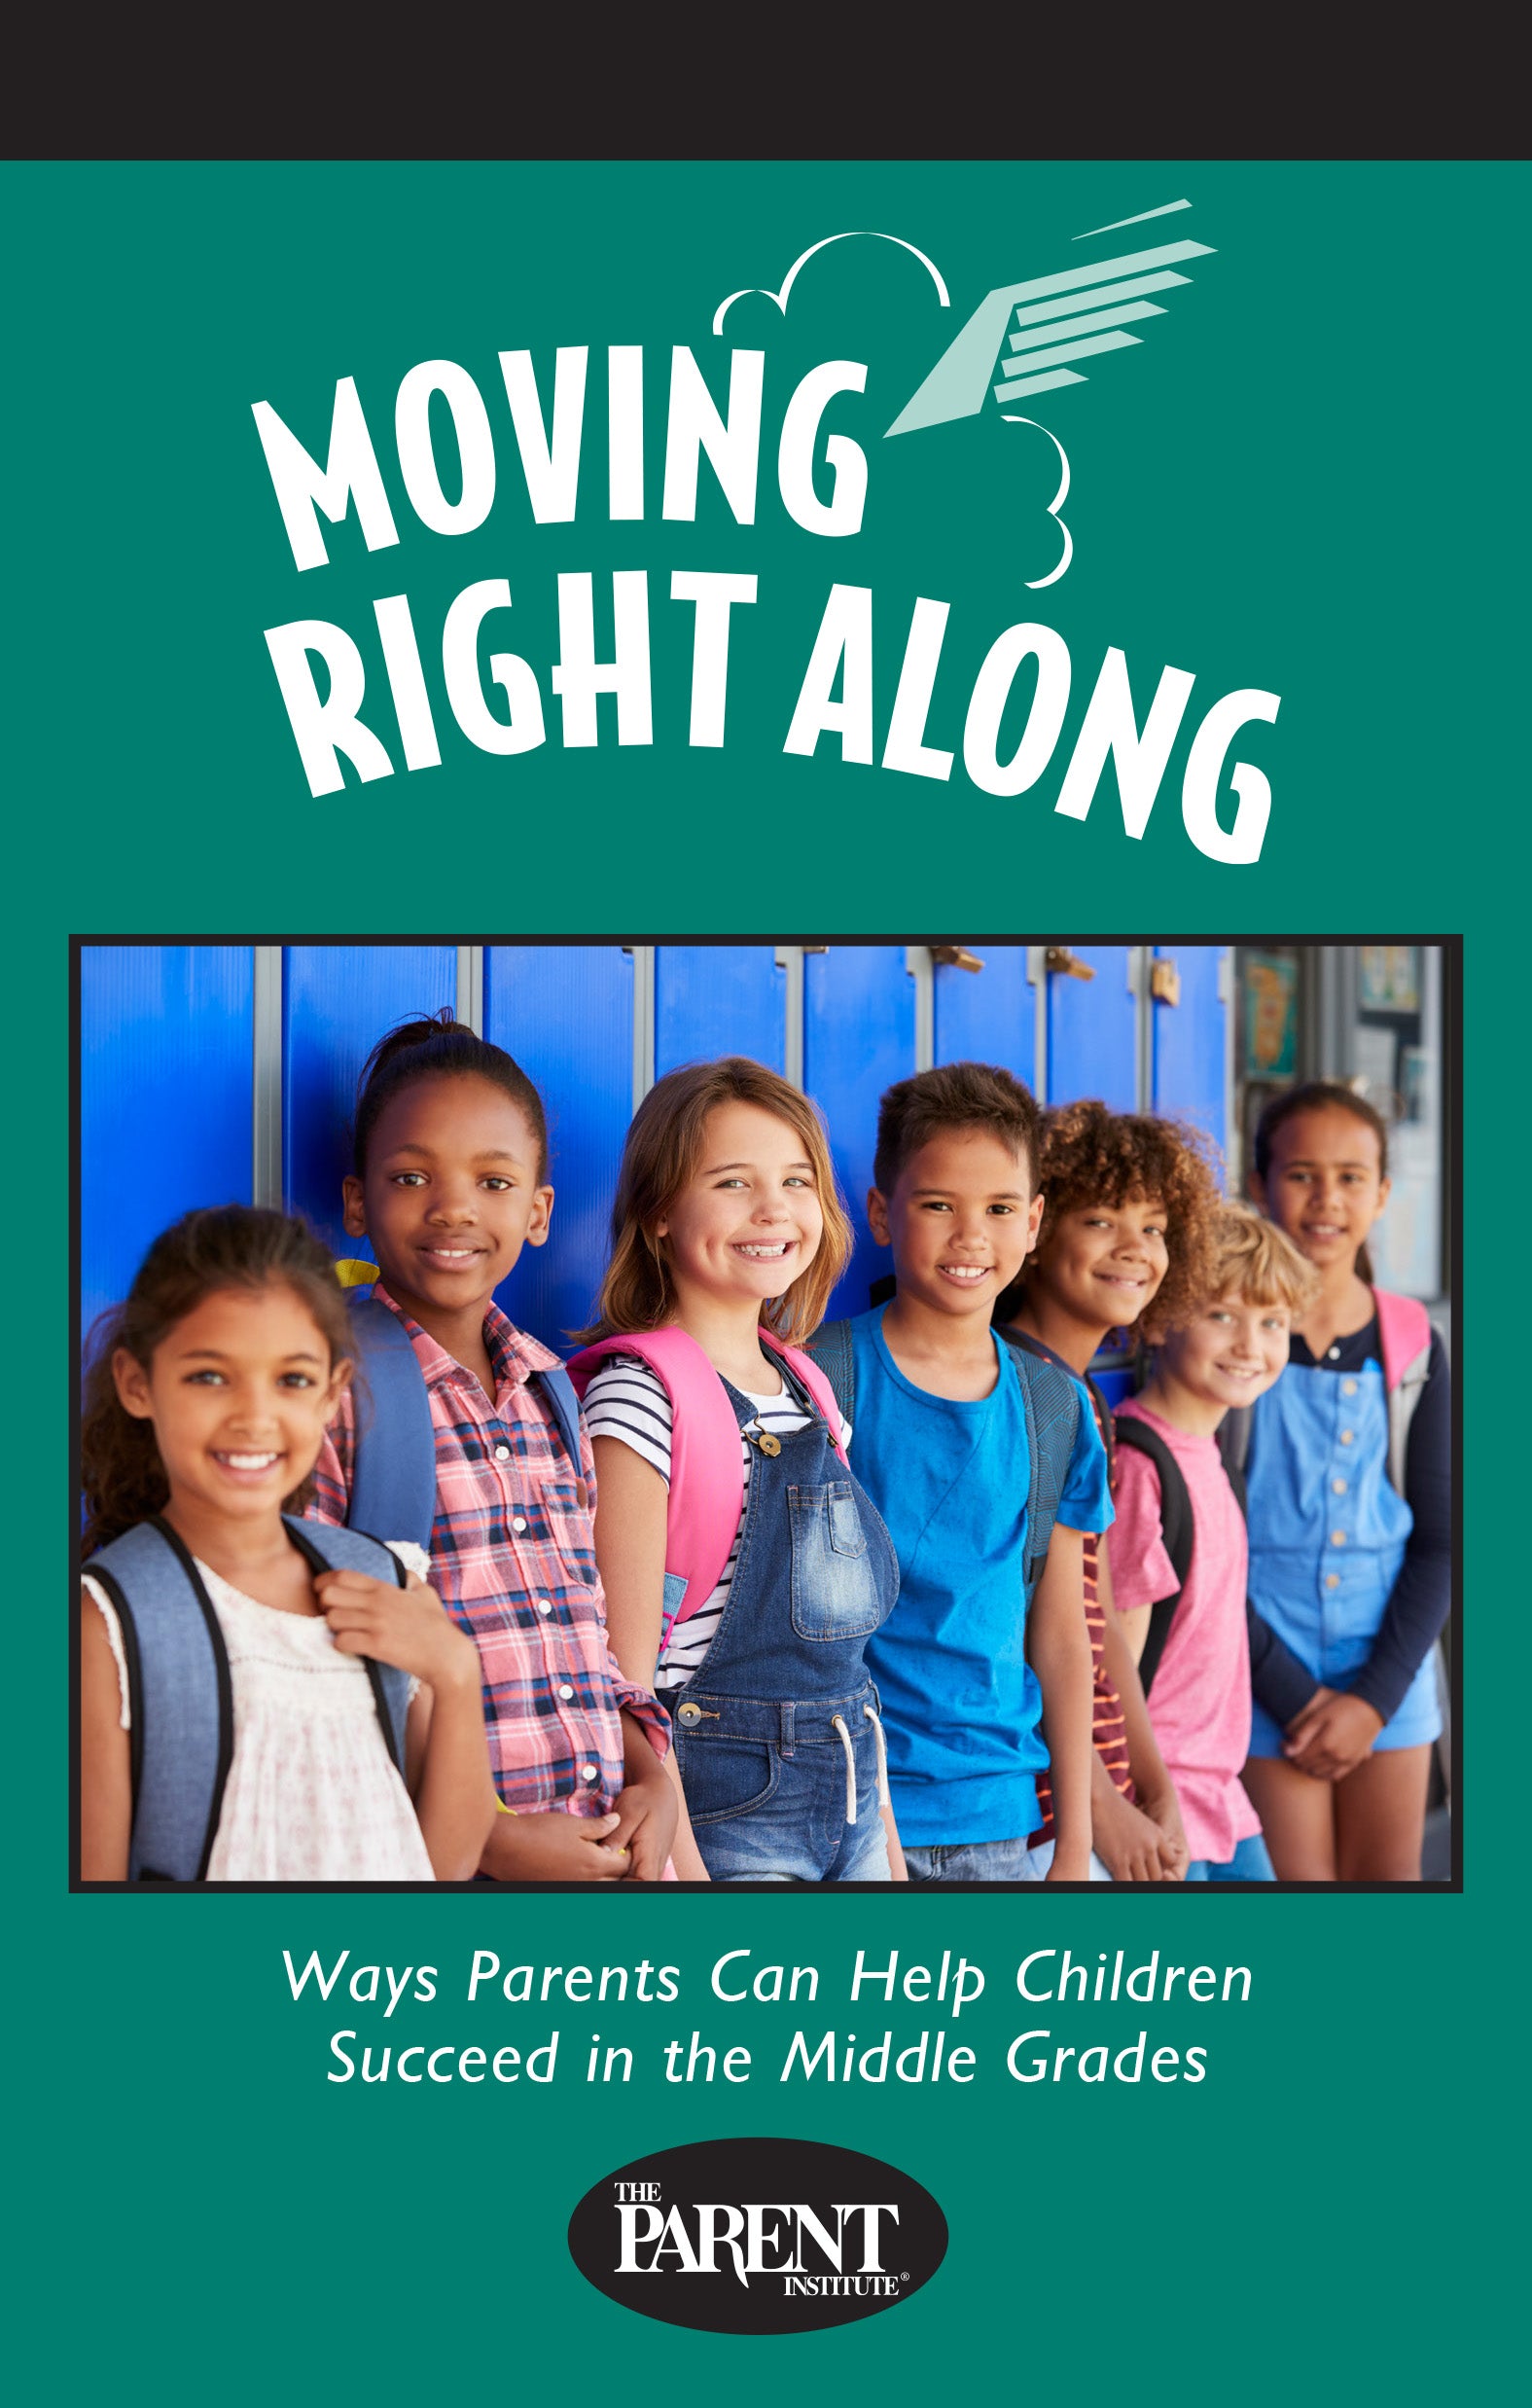 Moving Right Along: Ways Parents Can Help Children Succeed in the Middle Grades (Electronic)